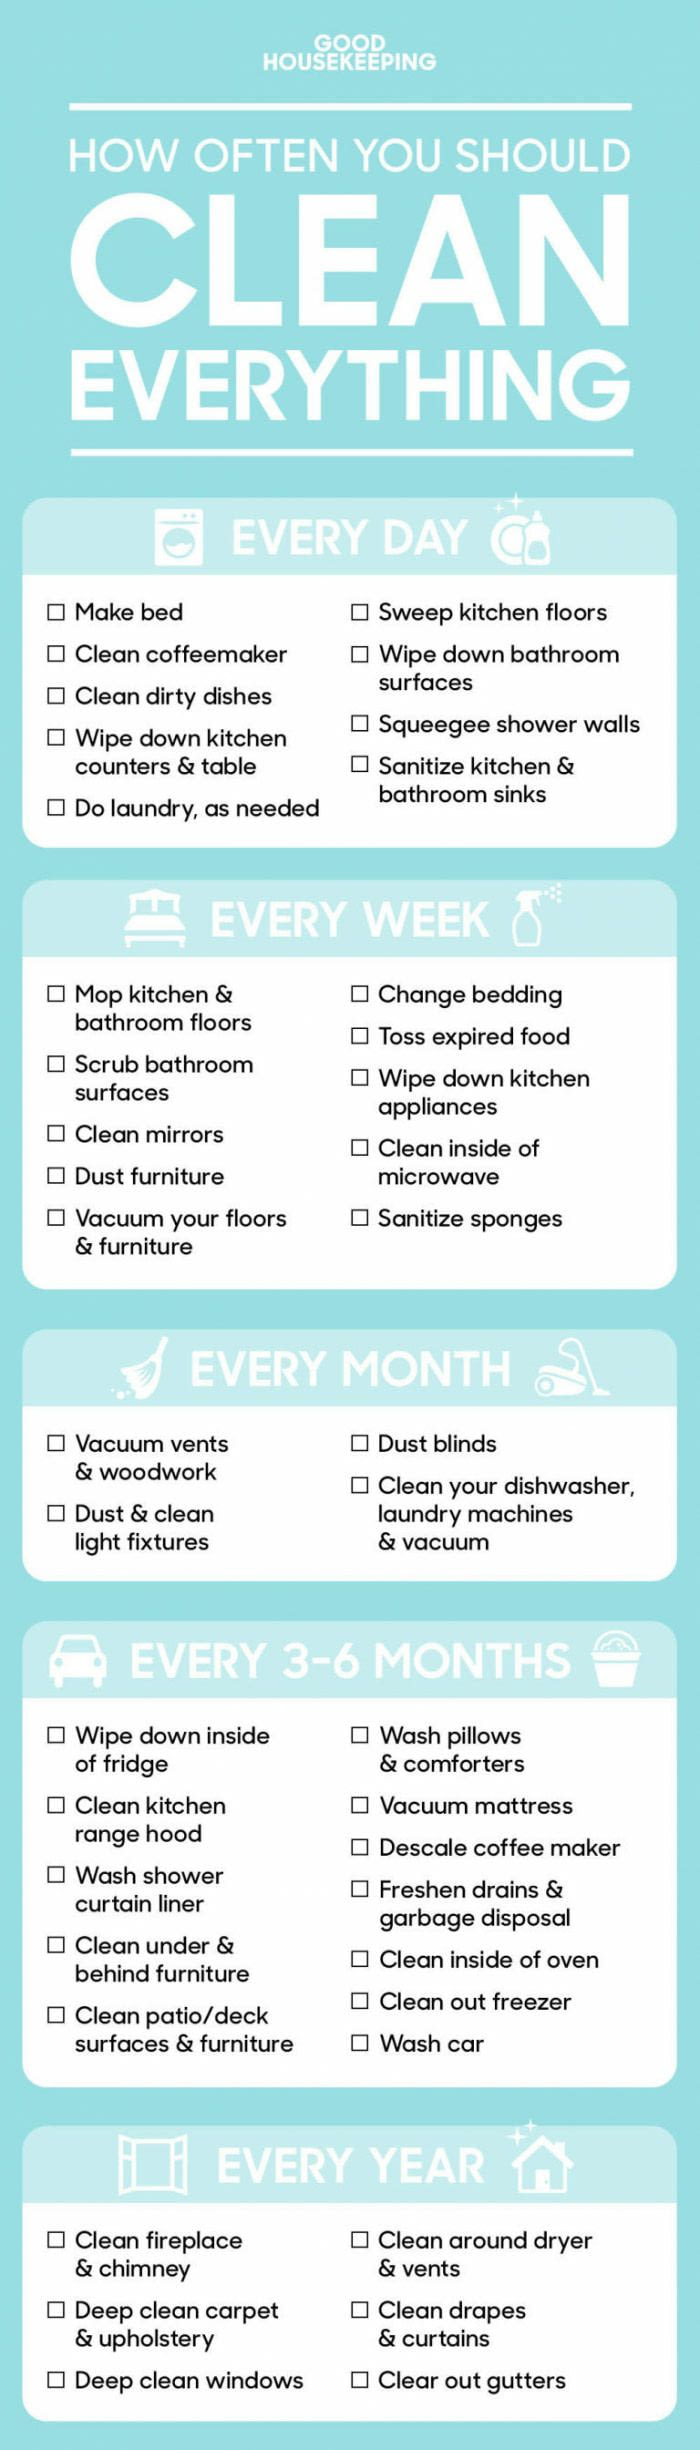 how often you should clean everything